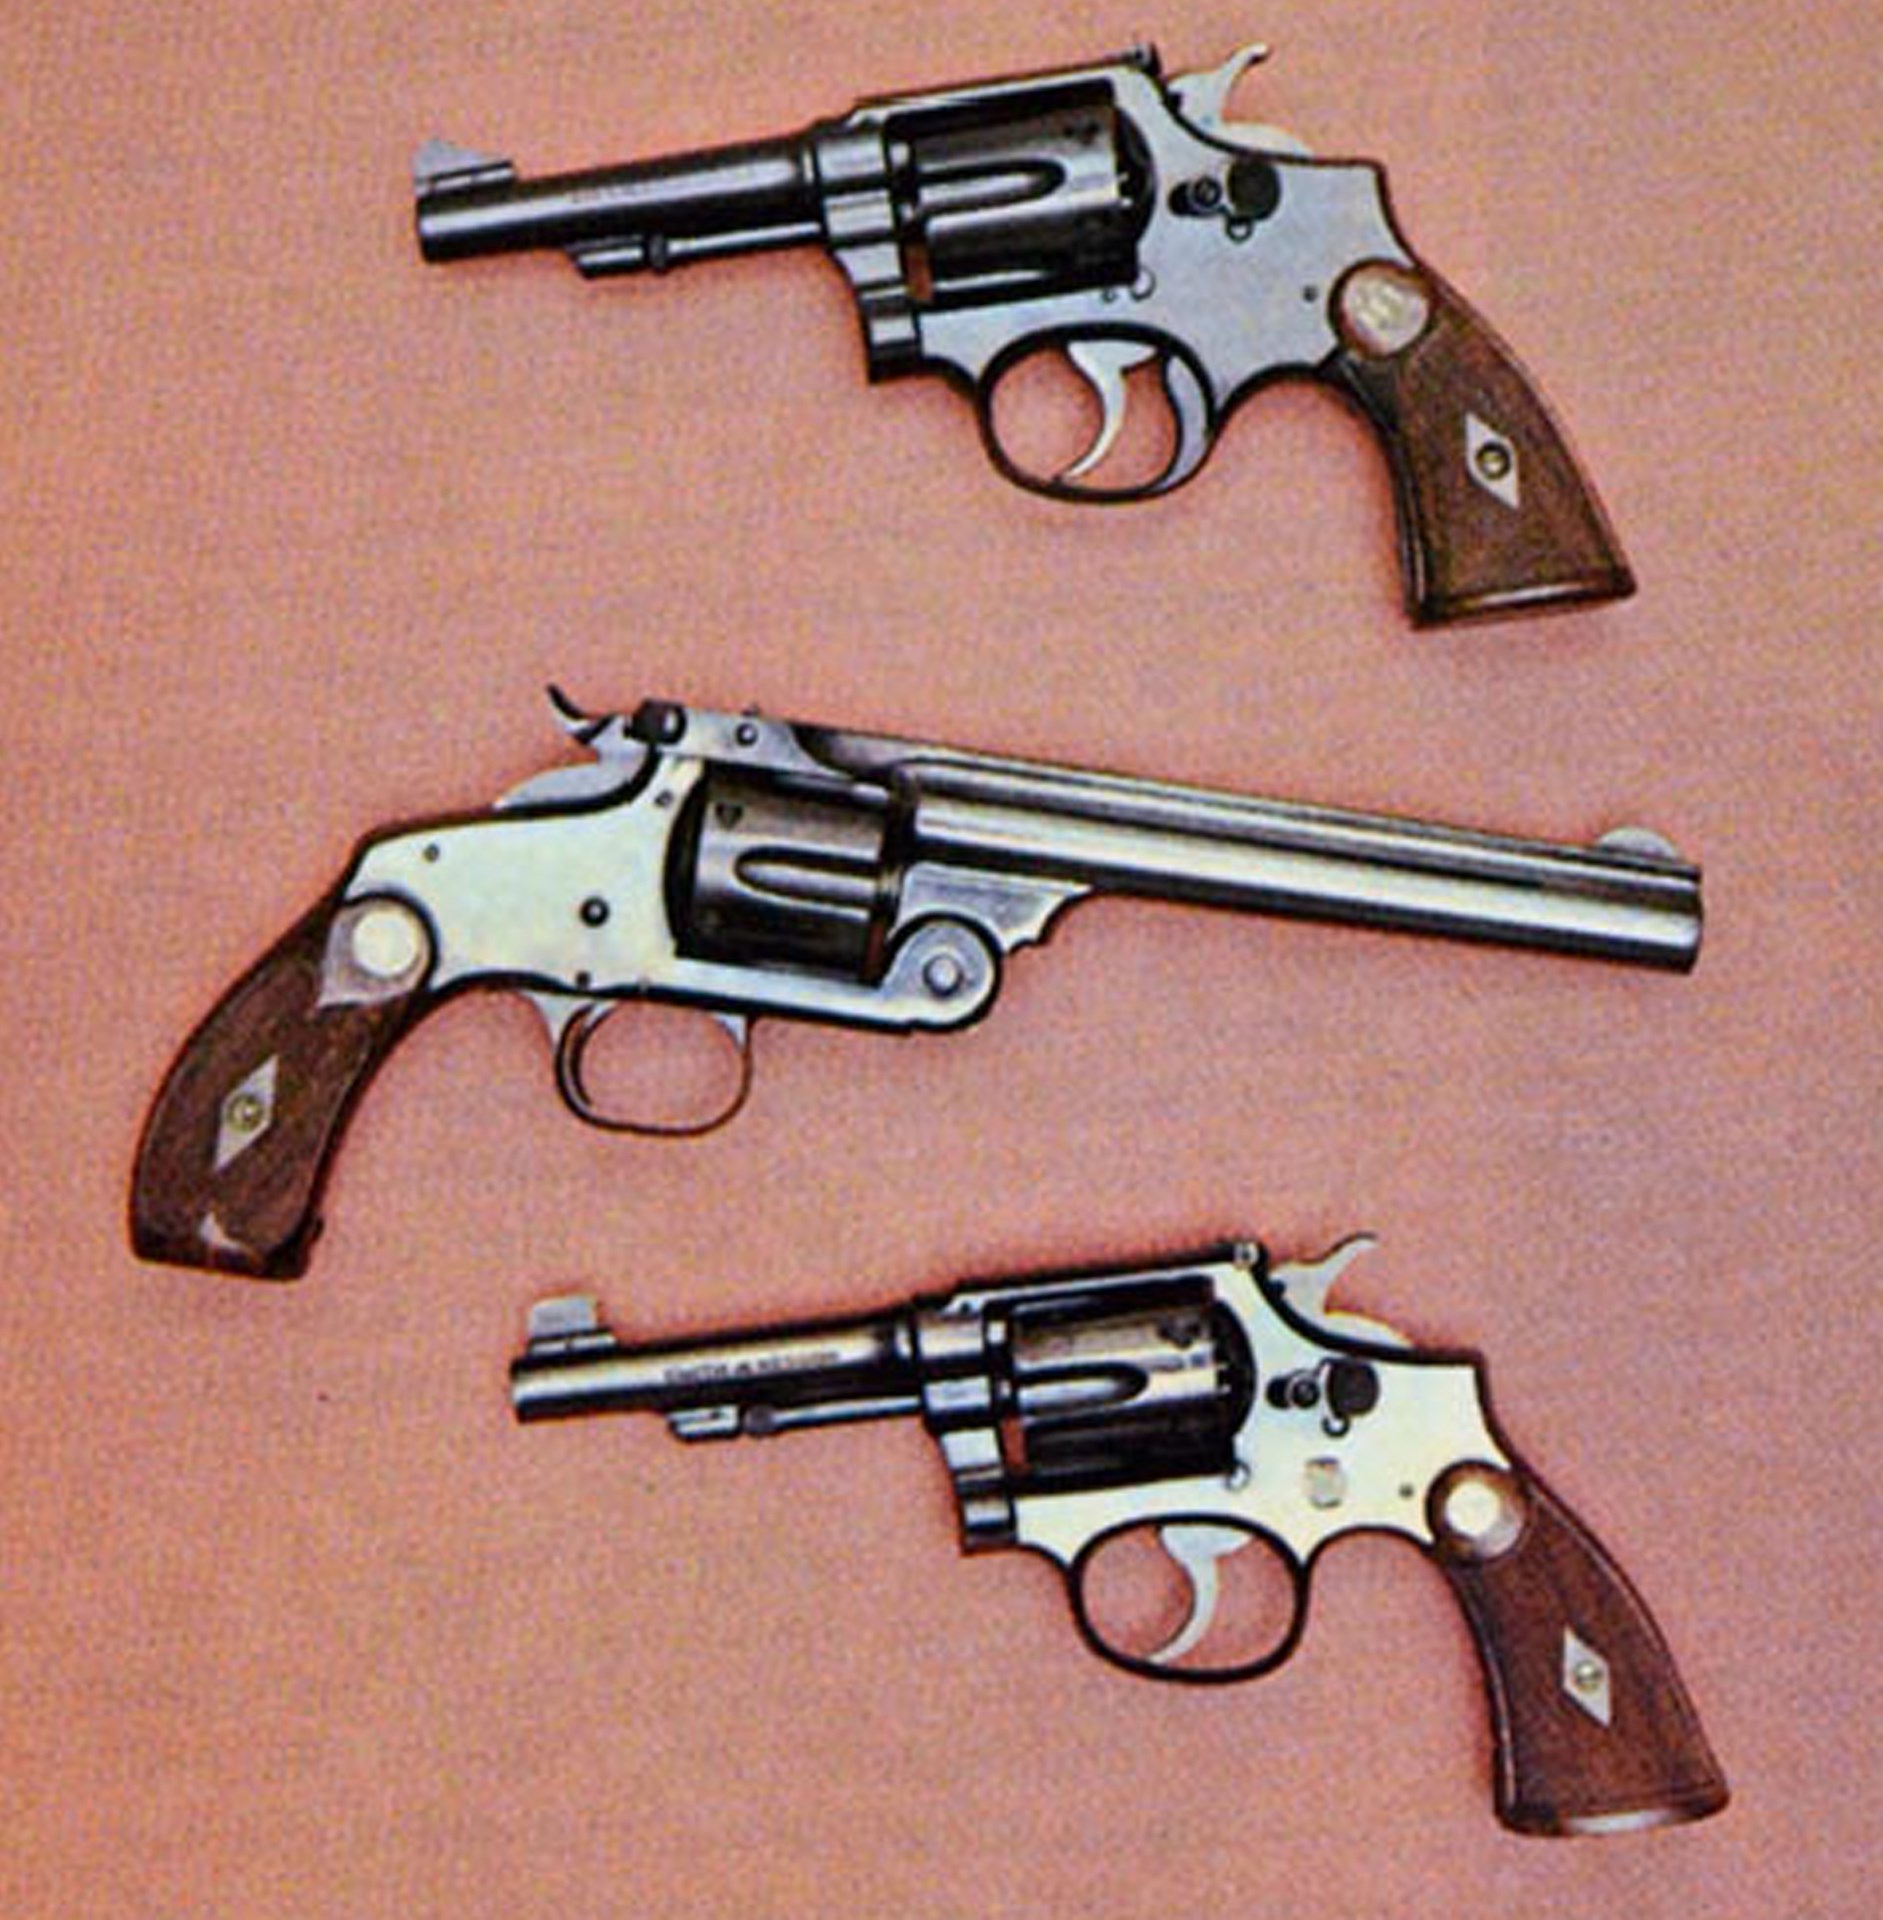 Smith & Wesson .38's include top-break Model 1891, cal. .38 S&W (center) and pair of .38 S&W Special Military and Police Target models (discontinued 1941). Top revolver has special trigger guard for double-action firing.